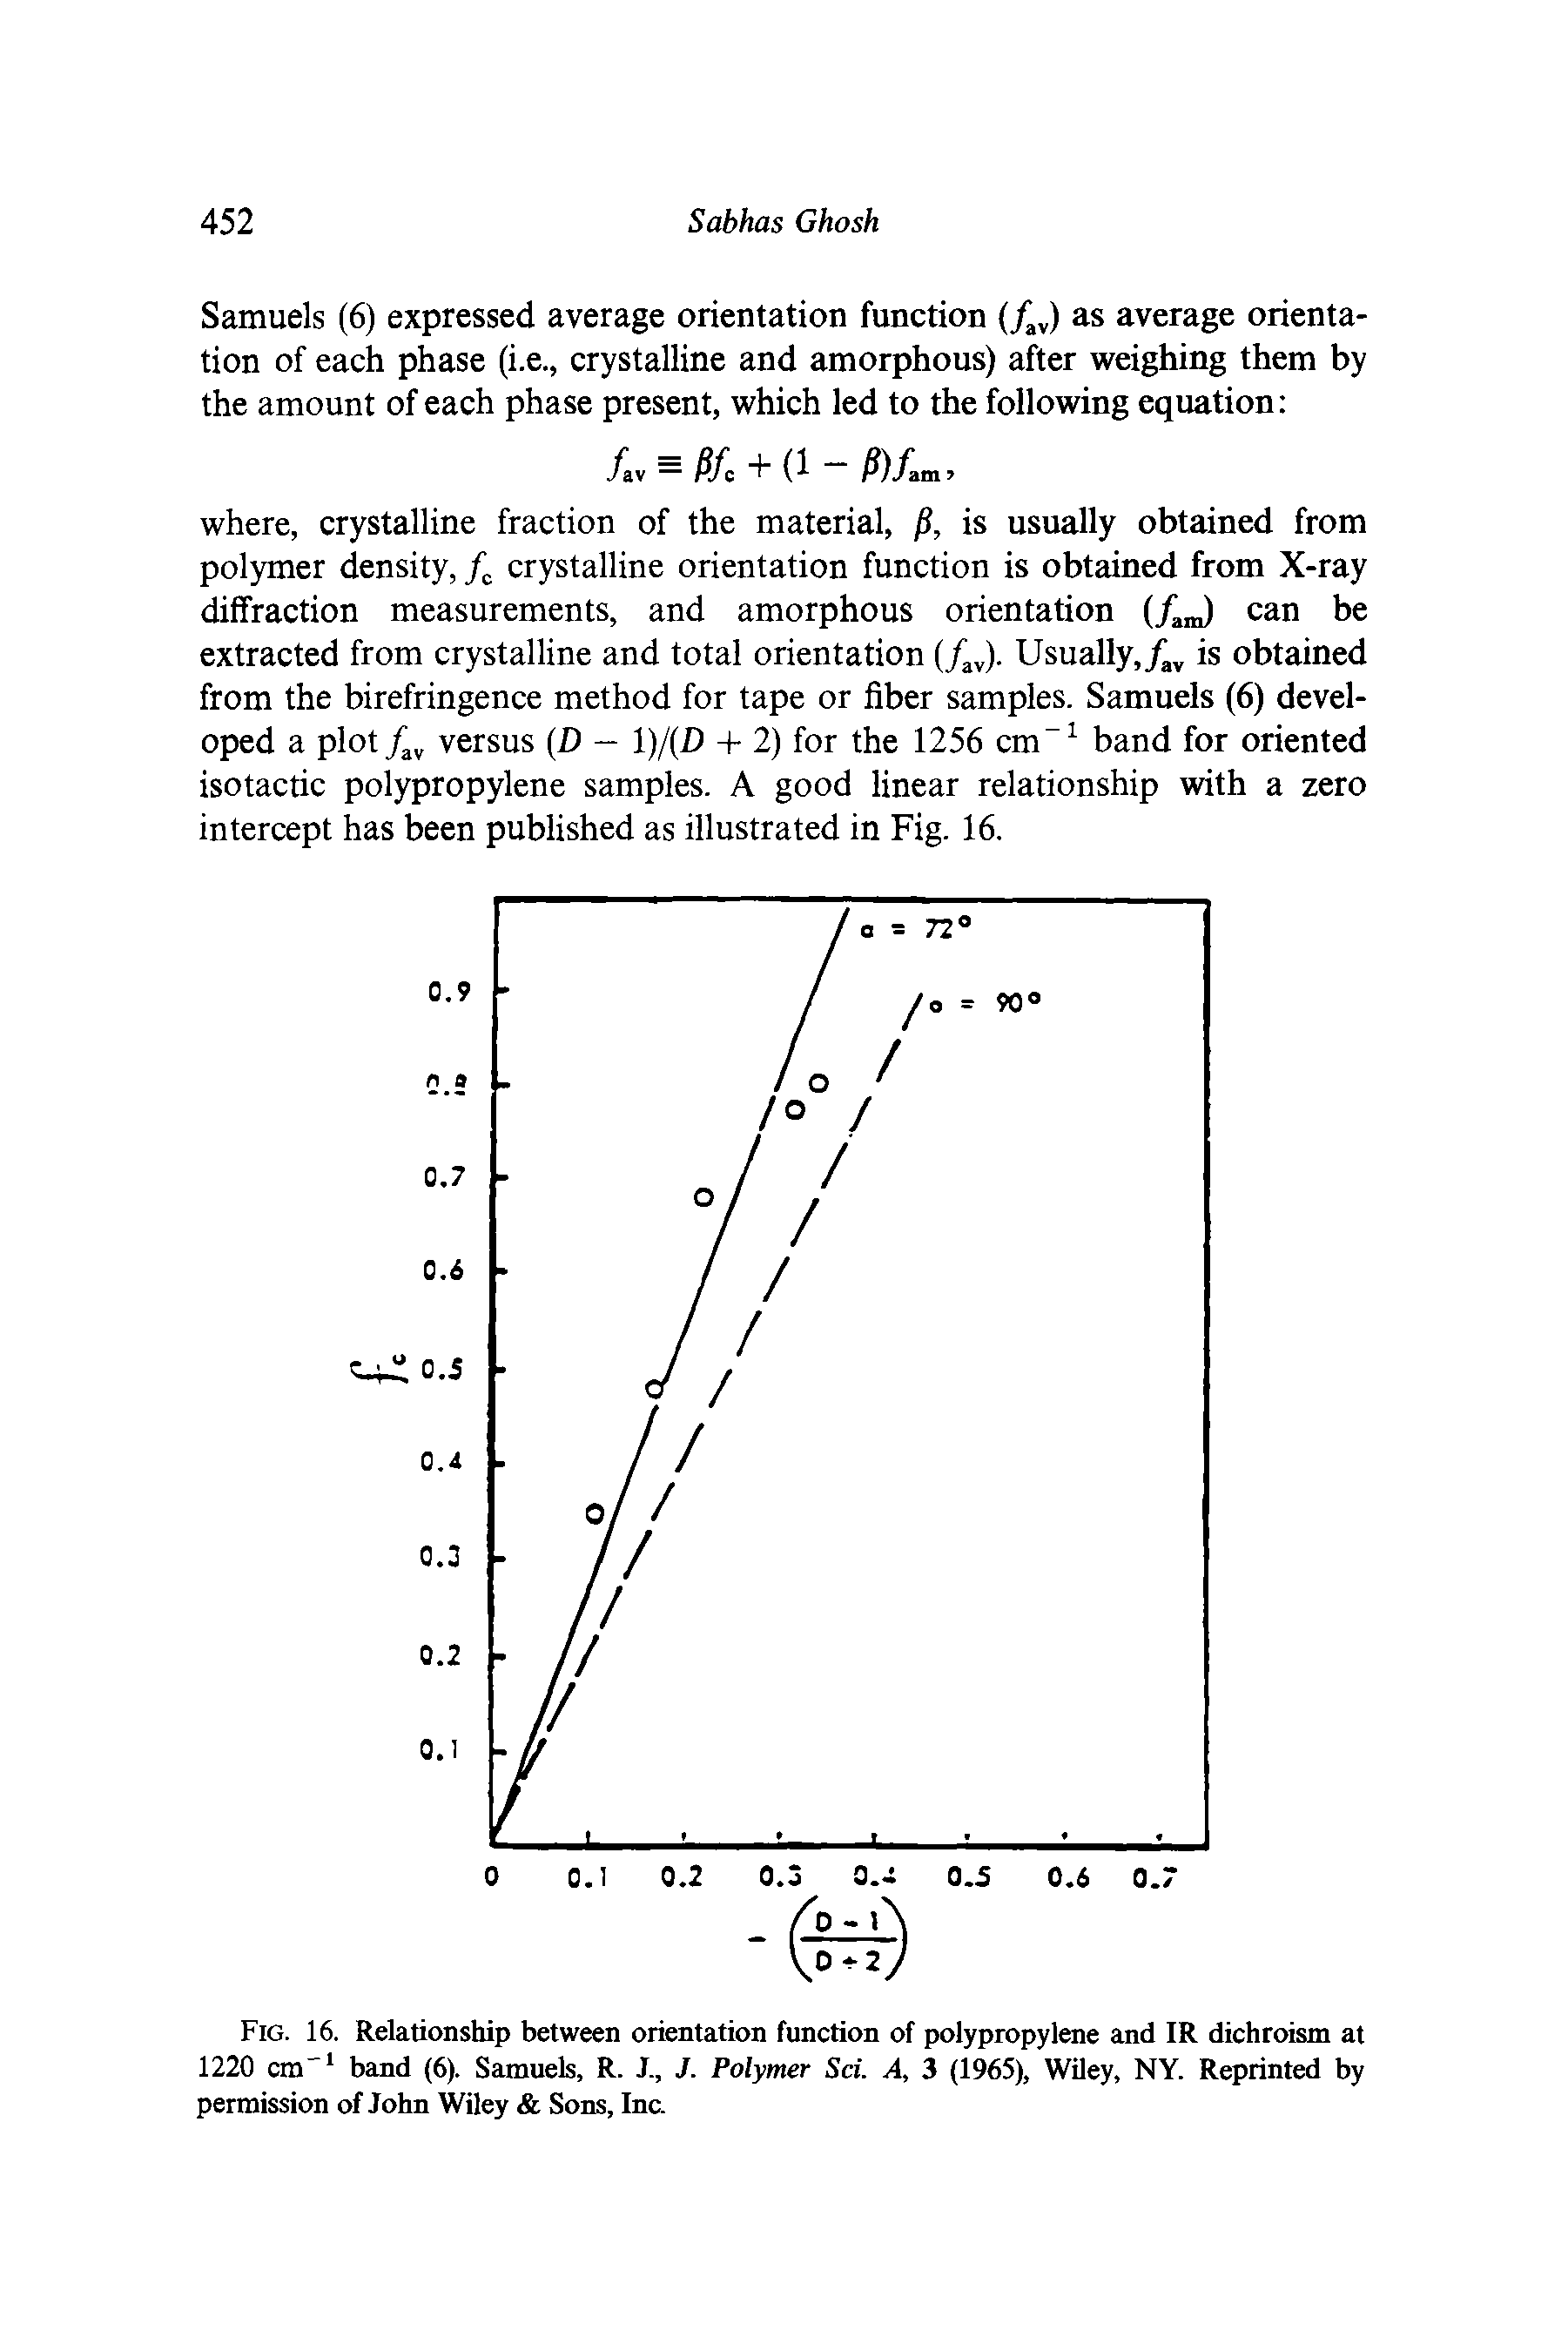 Fig. 16. Relationship between orientation function of polypropylene and IR dichroism at 1220 cm" band (6). Samuels, R. J., J. Polymer Sci. A, 3 (1965), Wiley, NY. Reprinted by permission of John Wiley Sons, In ...